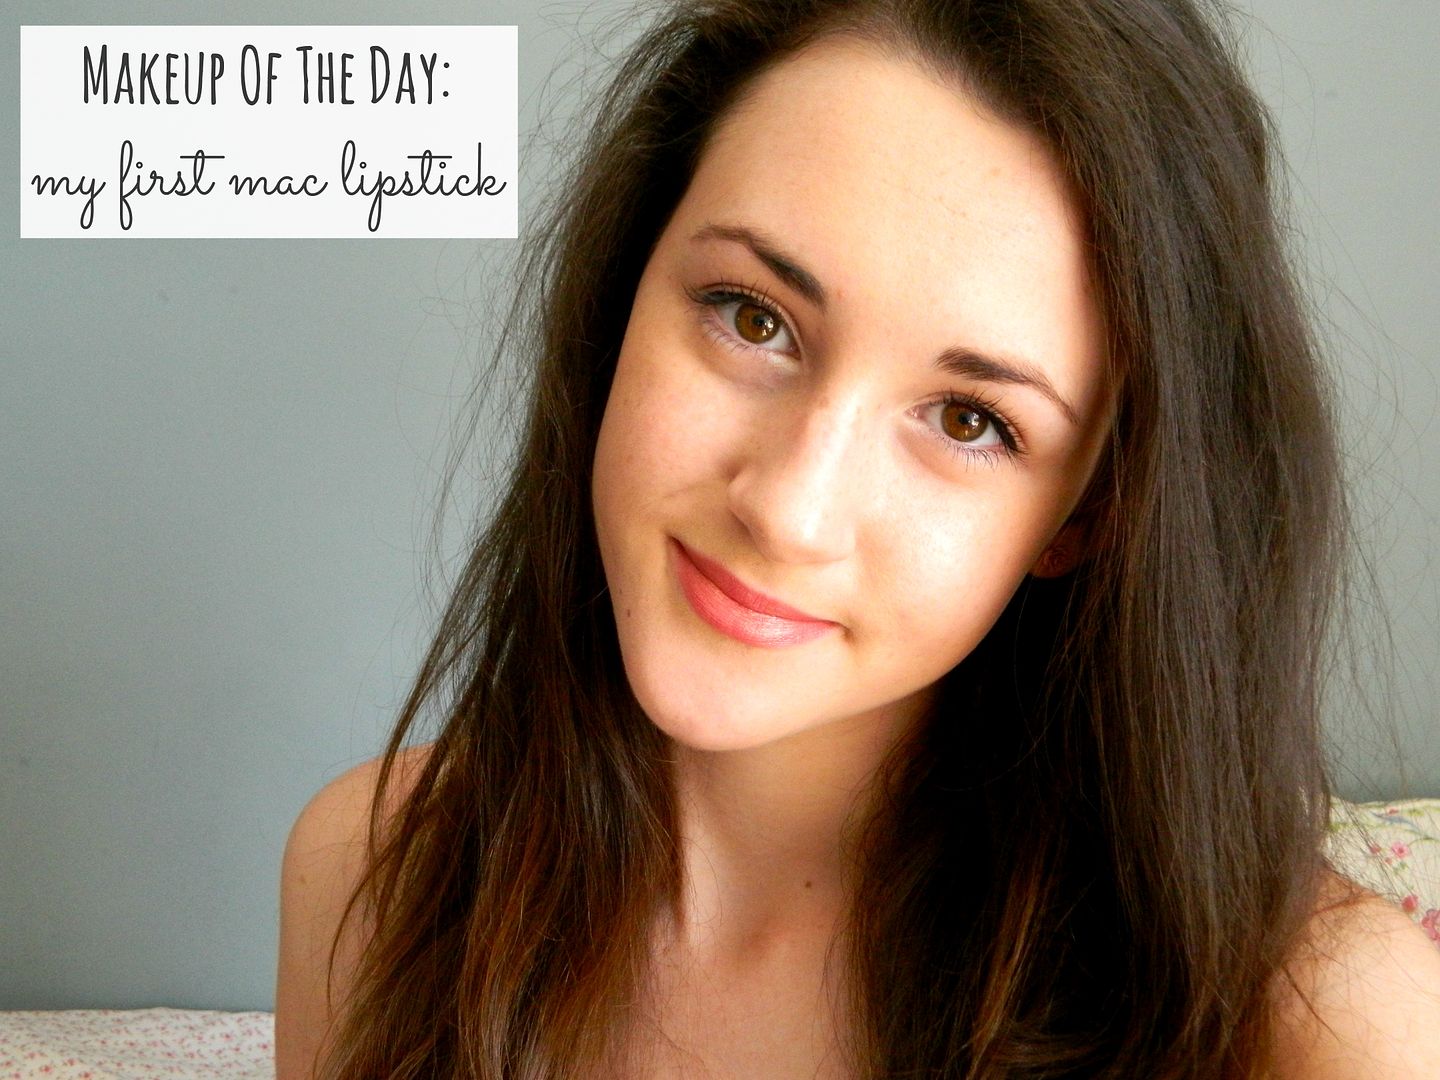 Makeup Of The Day My First MAC Lipstick Ramblin' Rose Face Photo Belle-amie UK Beauty Fashion Lifestyle Blog